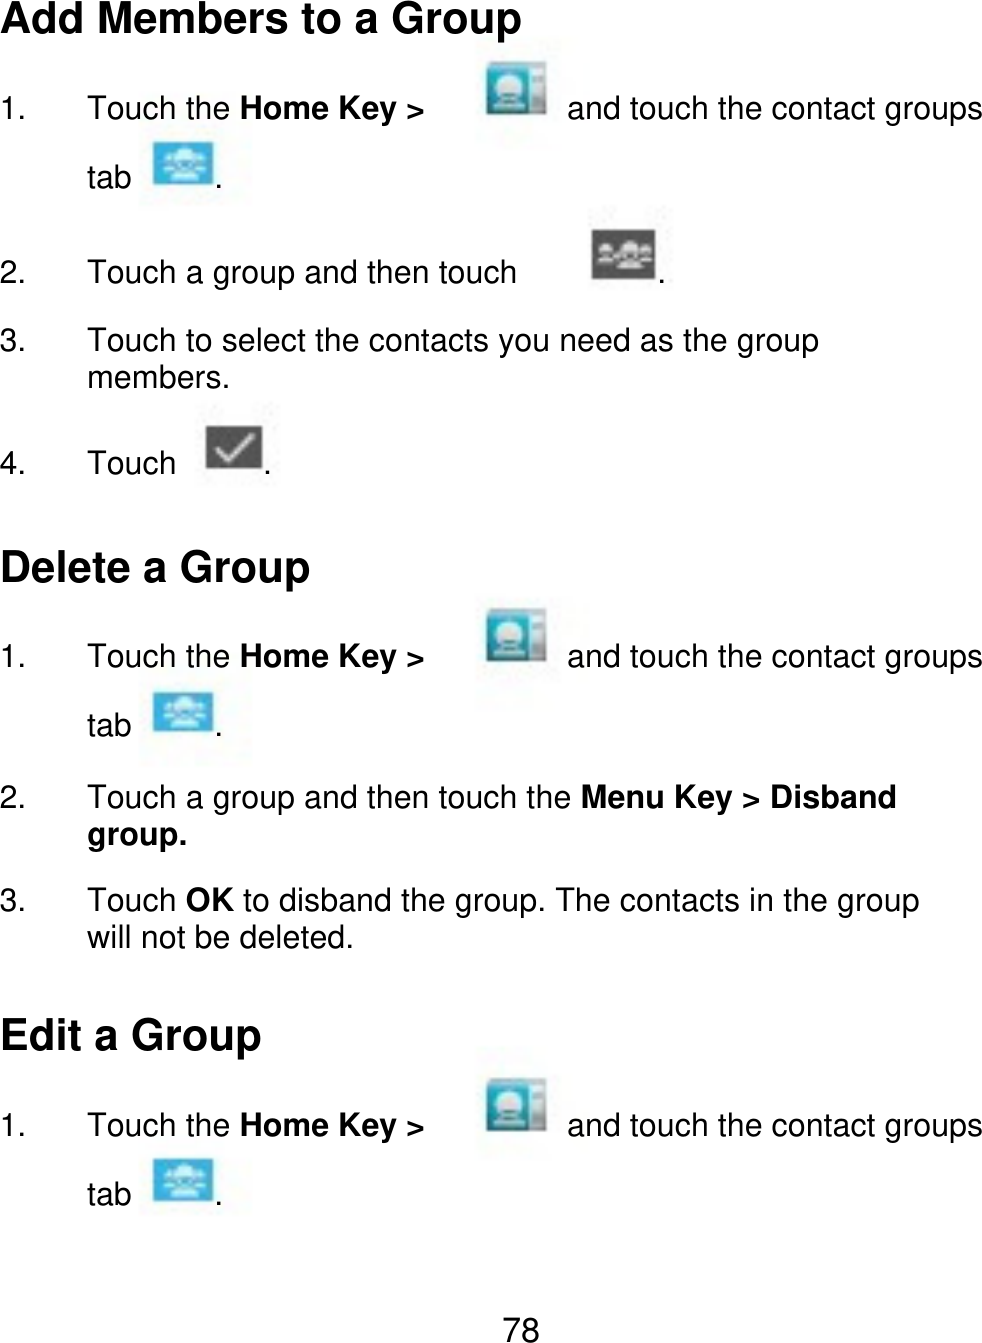 Add Members to a Group 1. Touch the Home Key &gt; tab 2. 3. 4. . . and touch the contact groups Touch a group and then touch Touch to select the contacts you need as the group members. Touch . Delete a Group 1. Touch the Home Key &gt; tab 2. 3. . and touch the contact groups Touch a group and then touch the Menu Key &gt; Disband group. Touch OK to disband the group. The contacts in the group will not be deleted. Edit a Group 1. Touch the Home Key &gt; tab . and touch the contact groups 78 